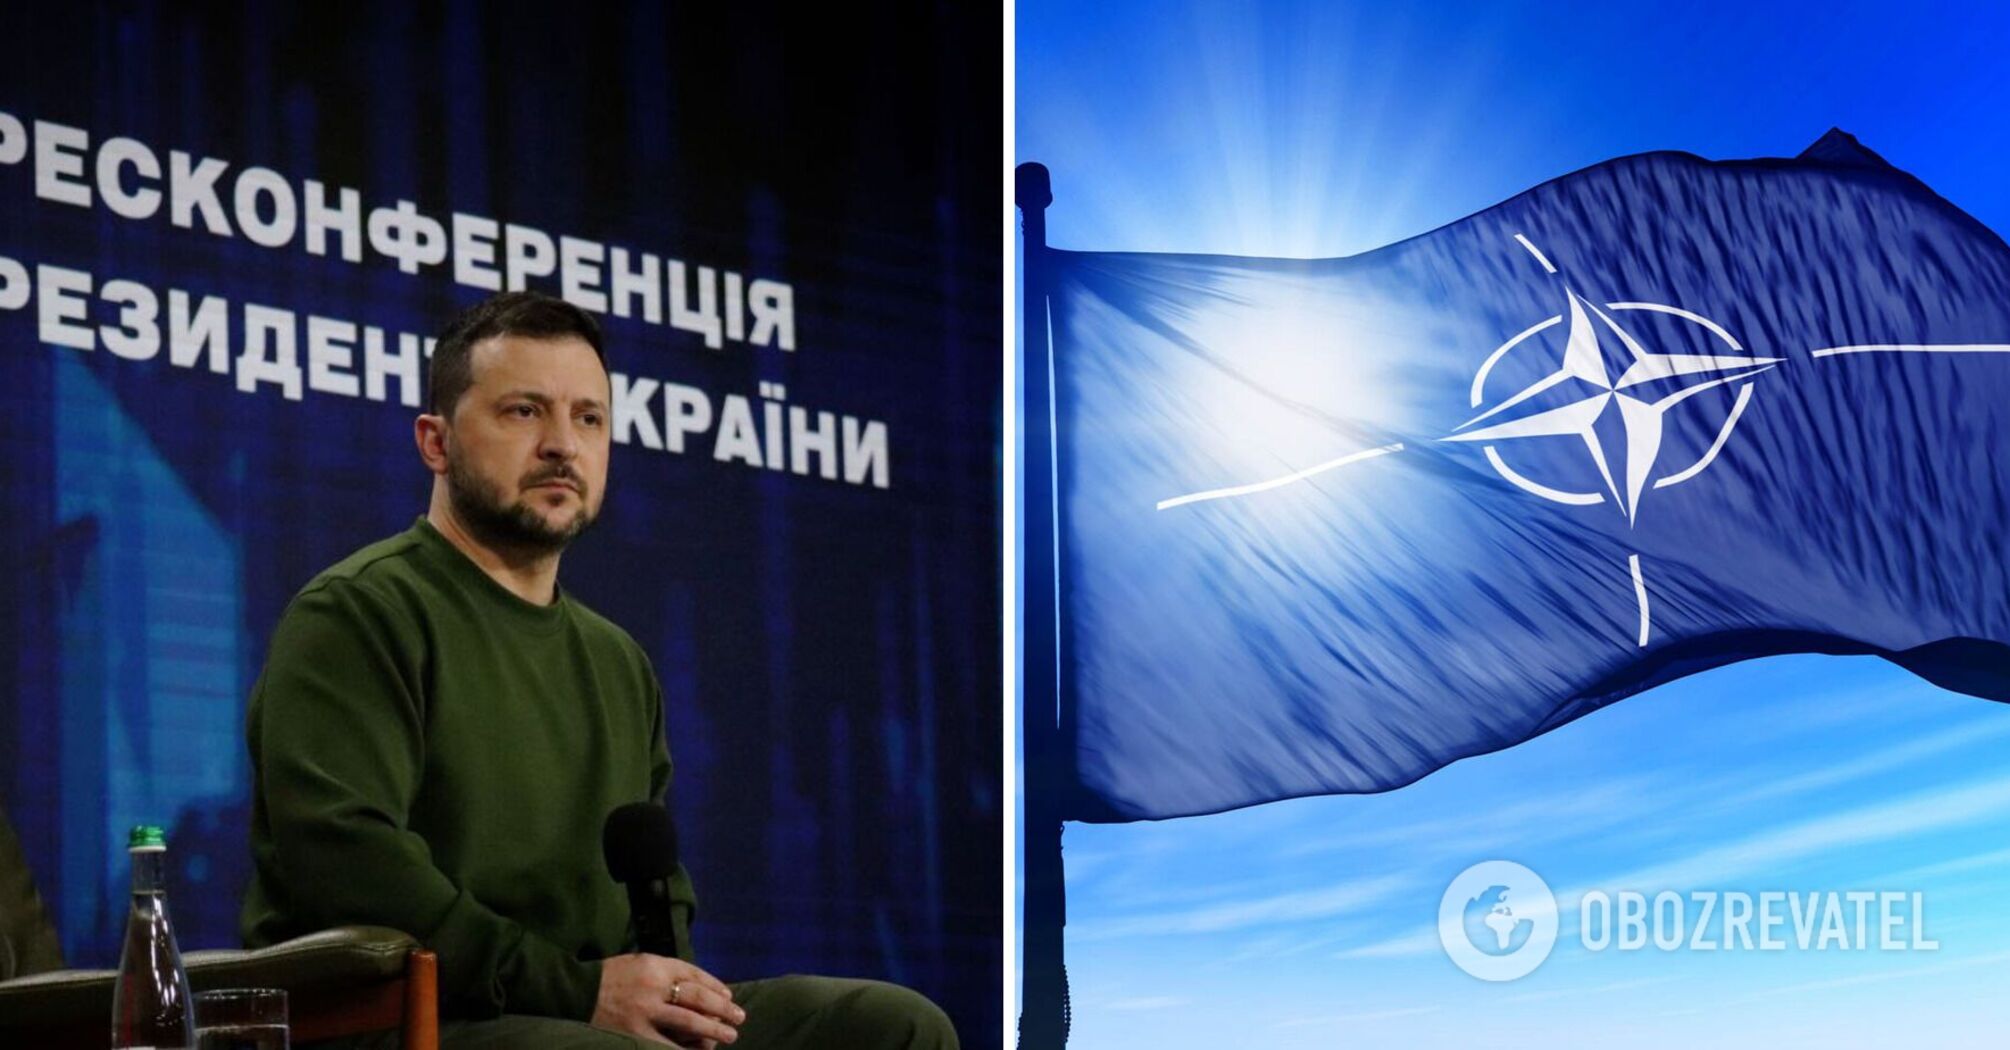 On whom Ukraine's invitation to NATO depends: Zelensky names two countries